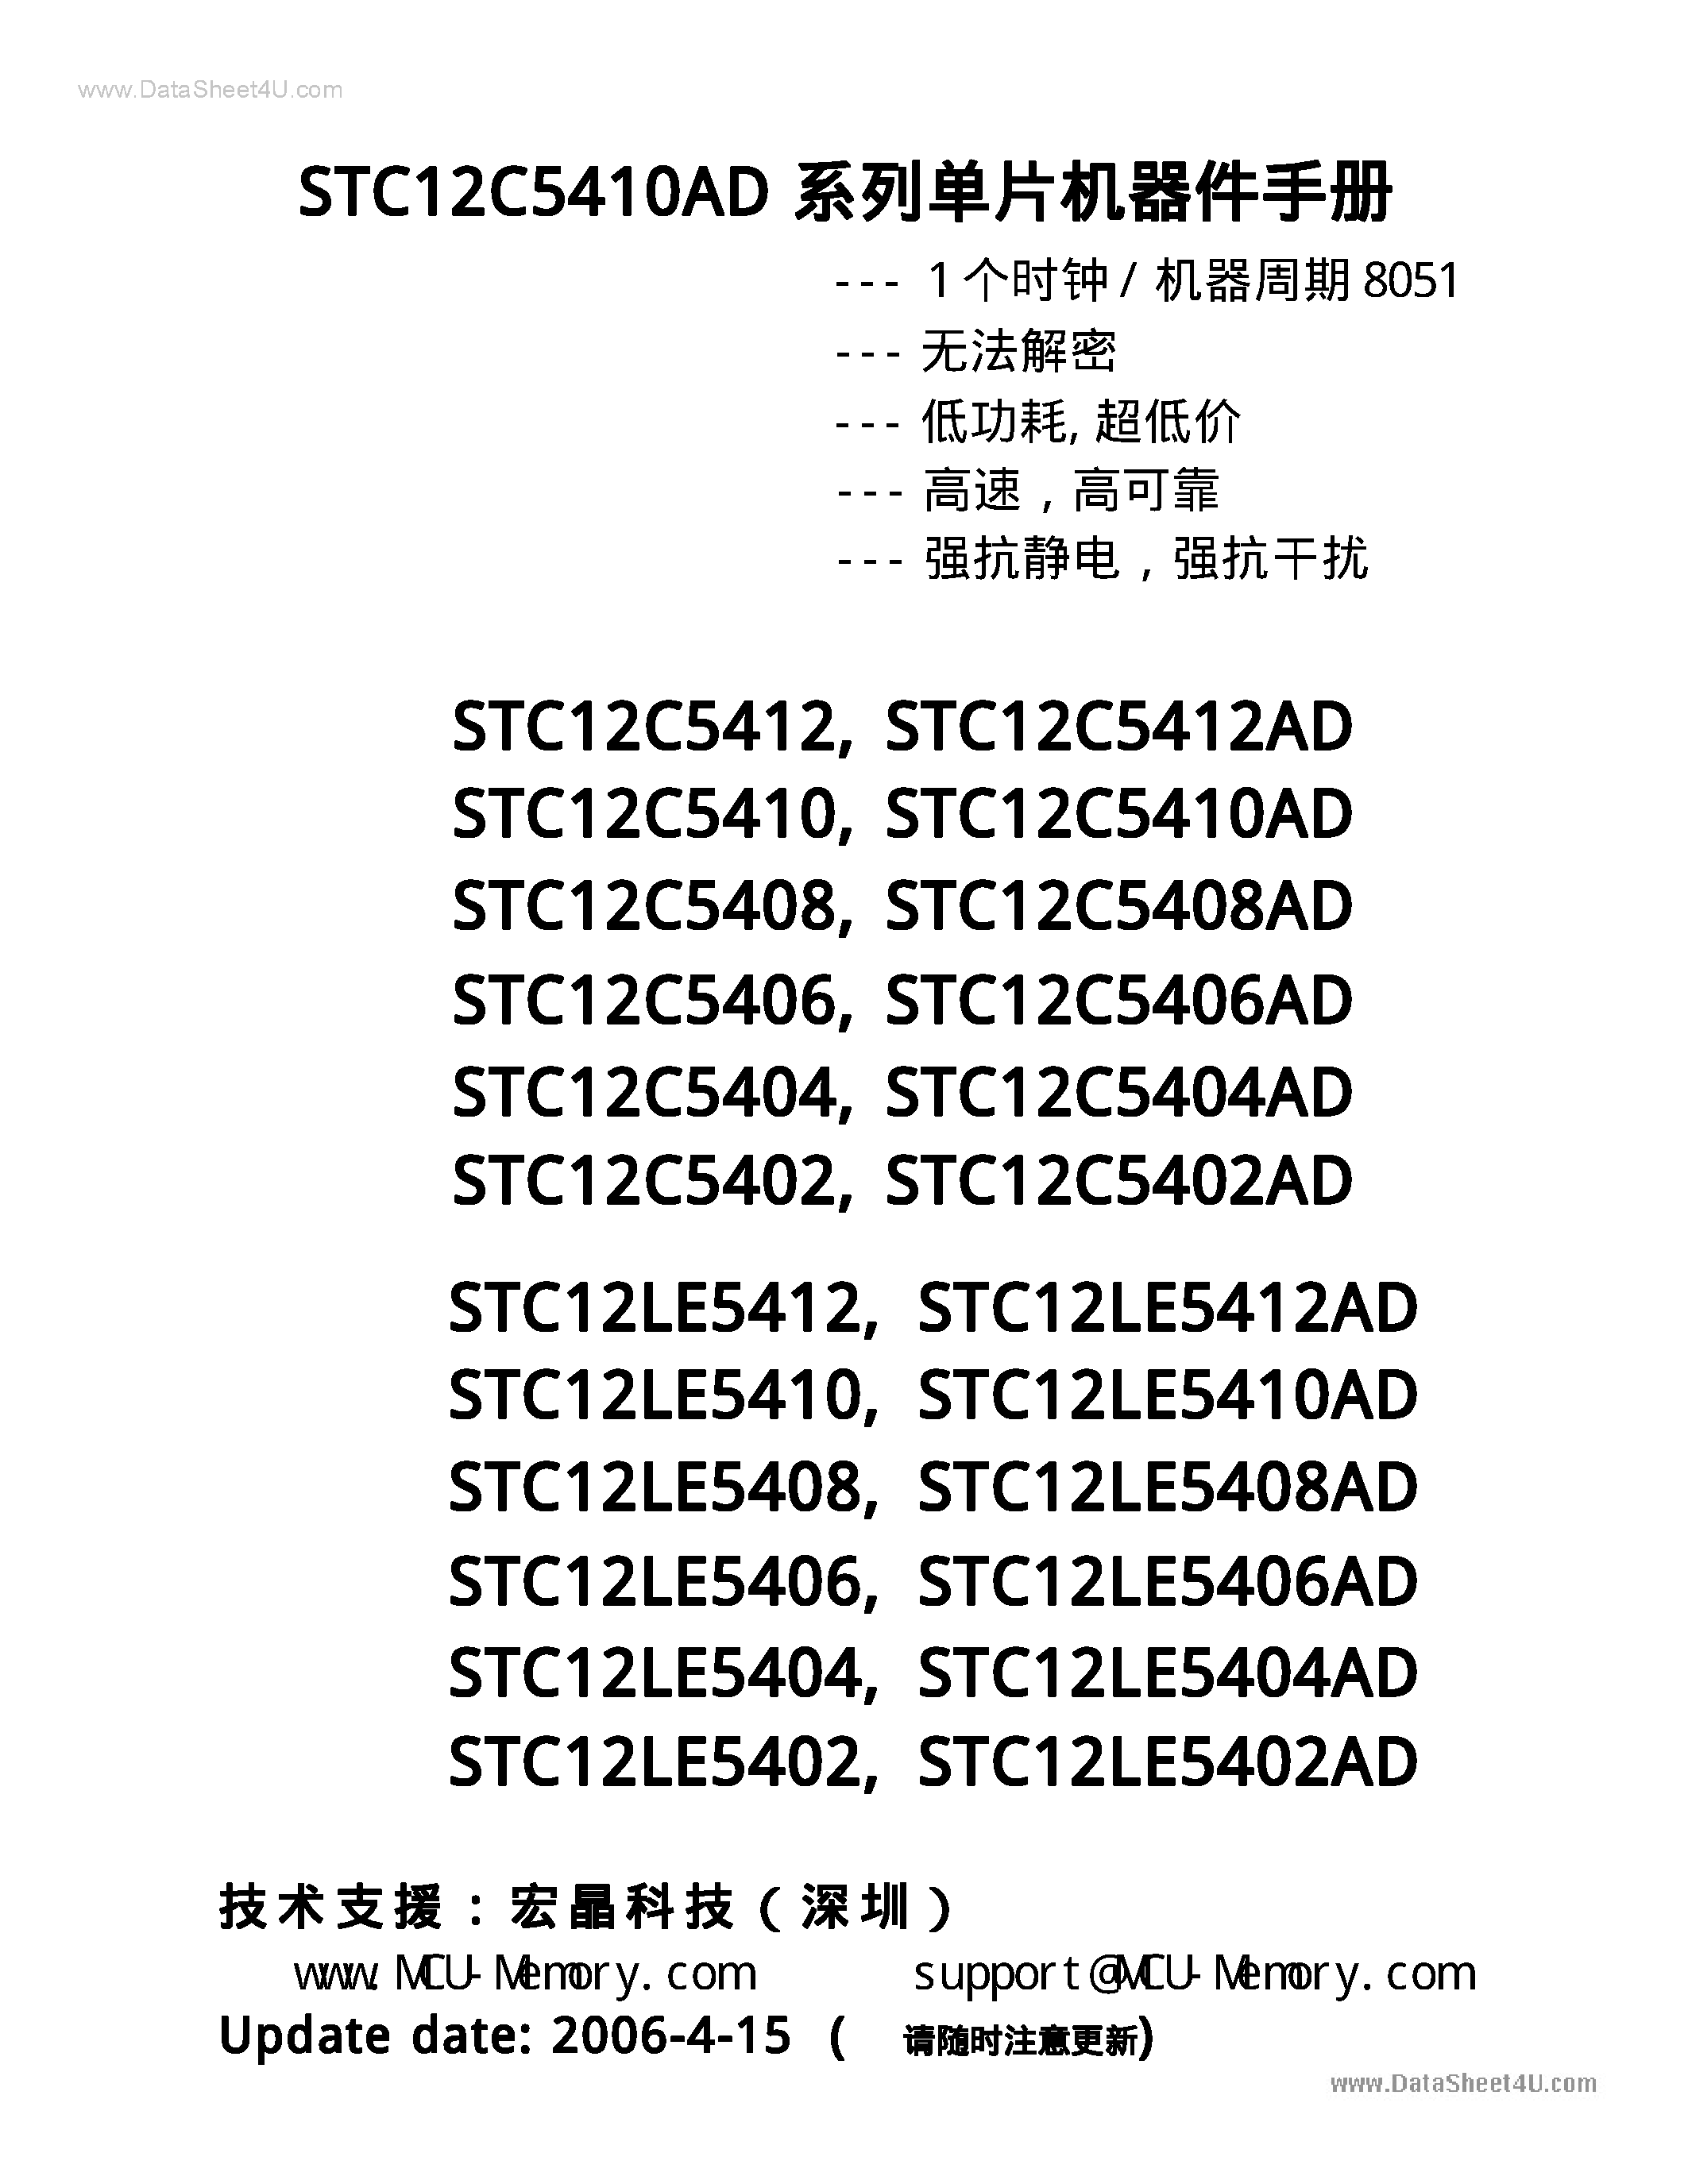 Datasheet 89C516RD - Search -----> ST89C516RD page 1